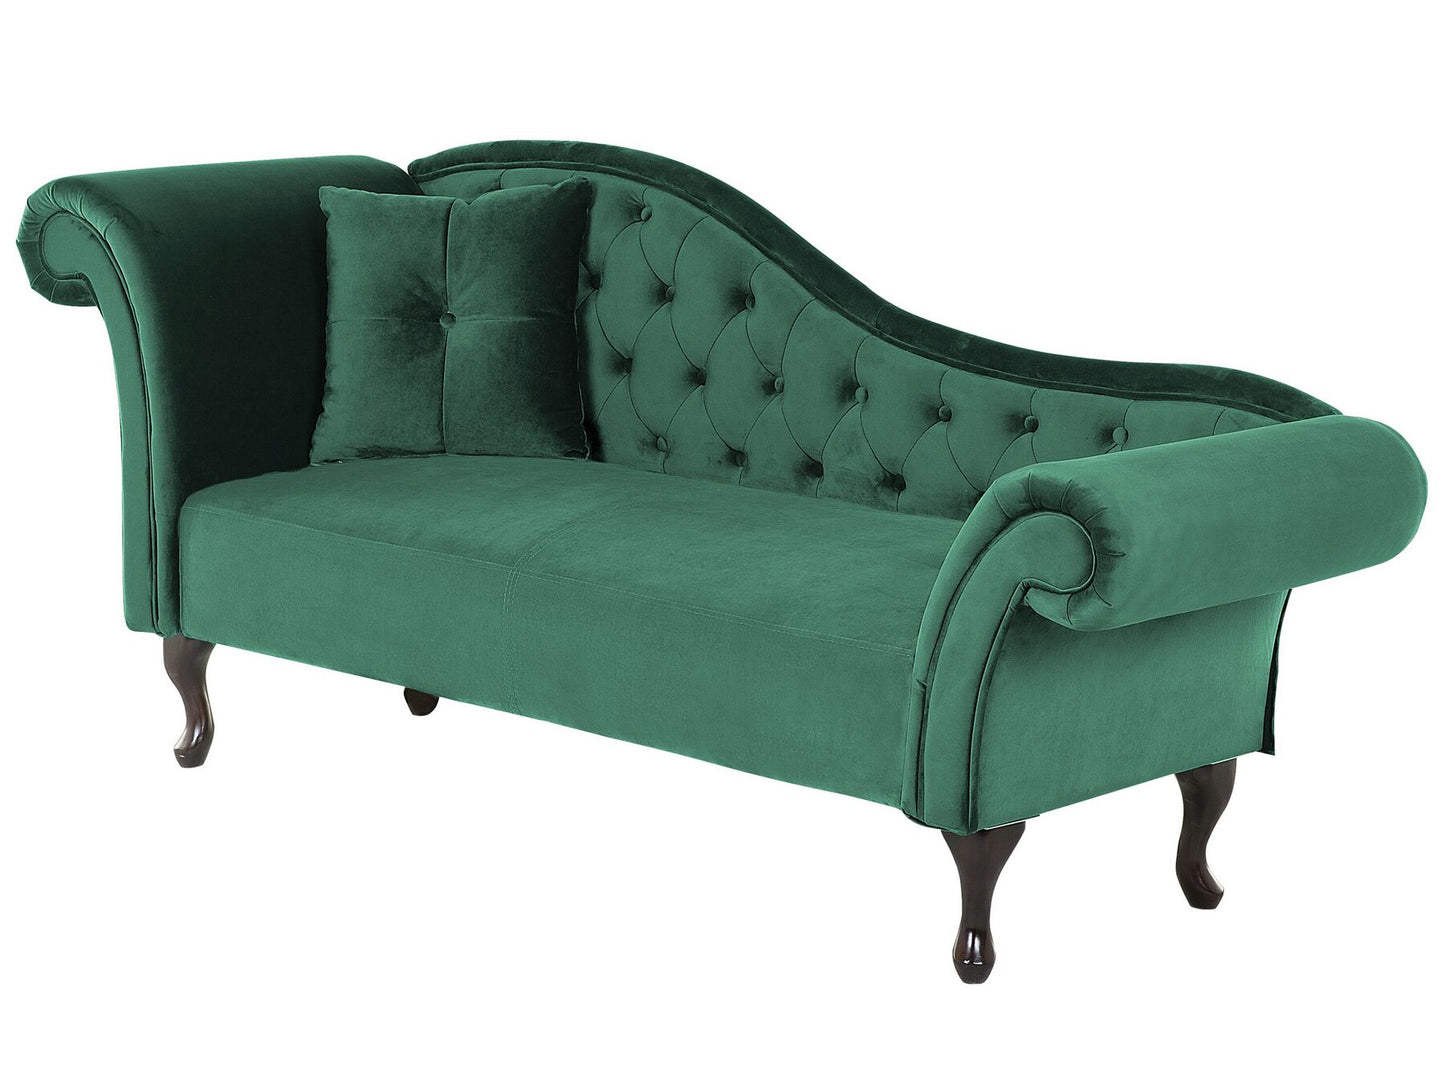 Lates Chesterfield Chaise